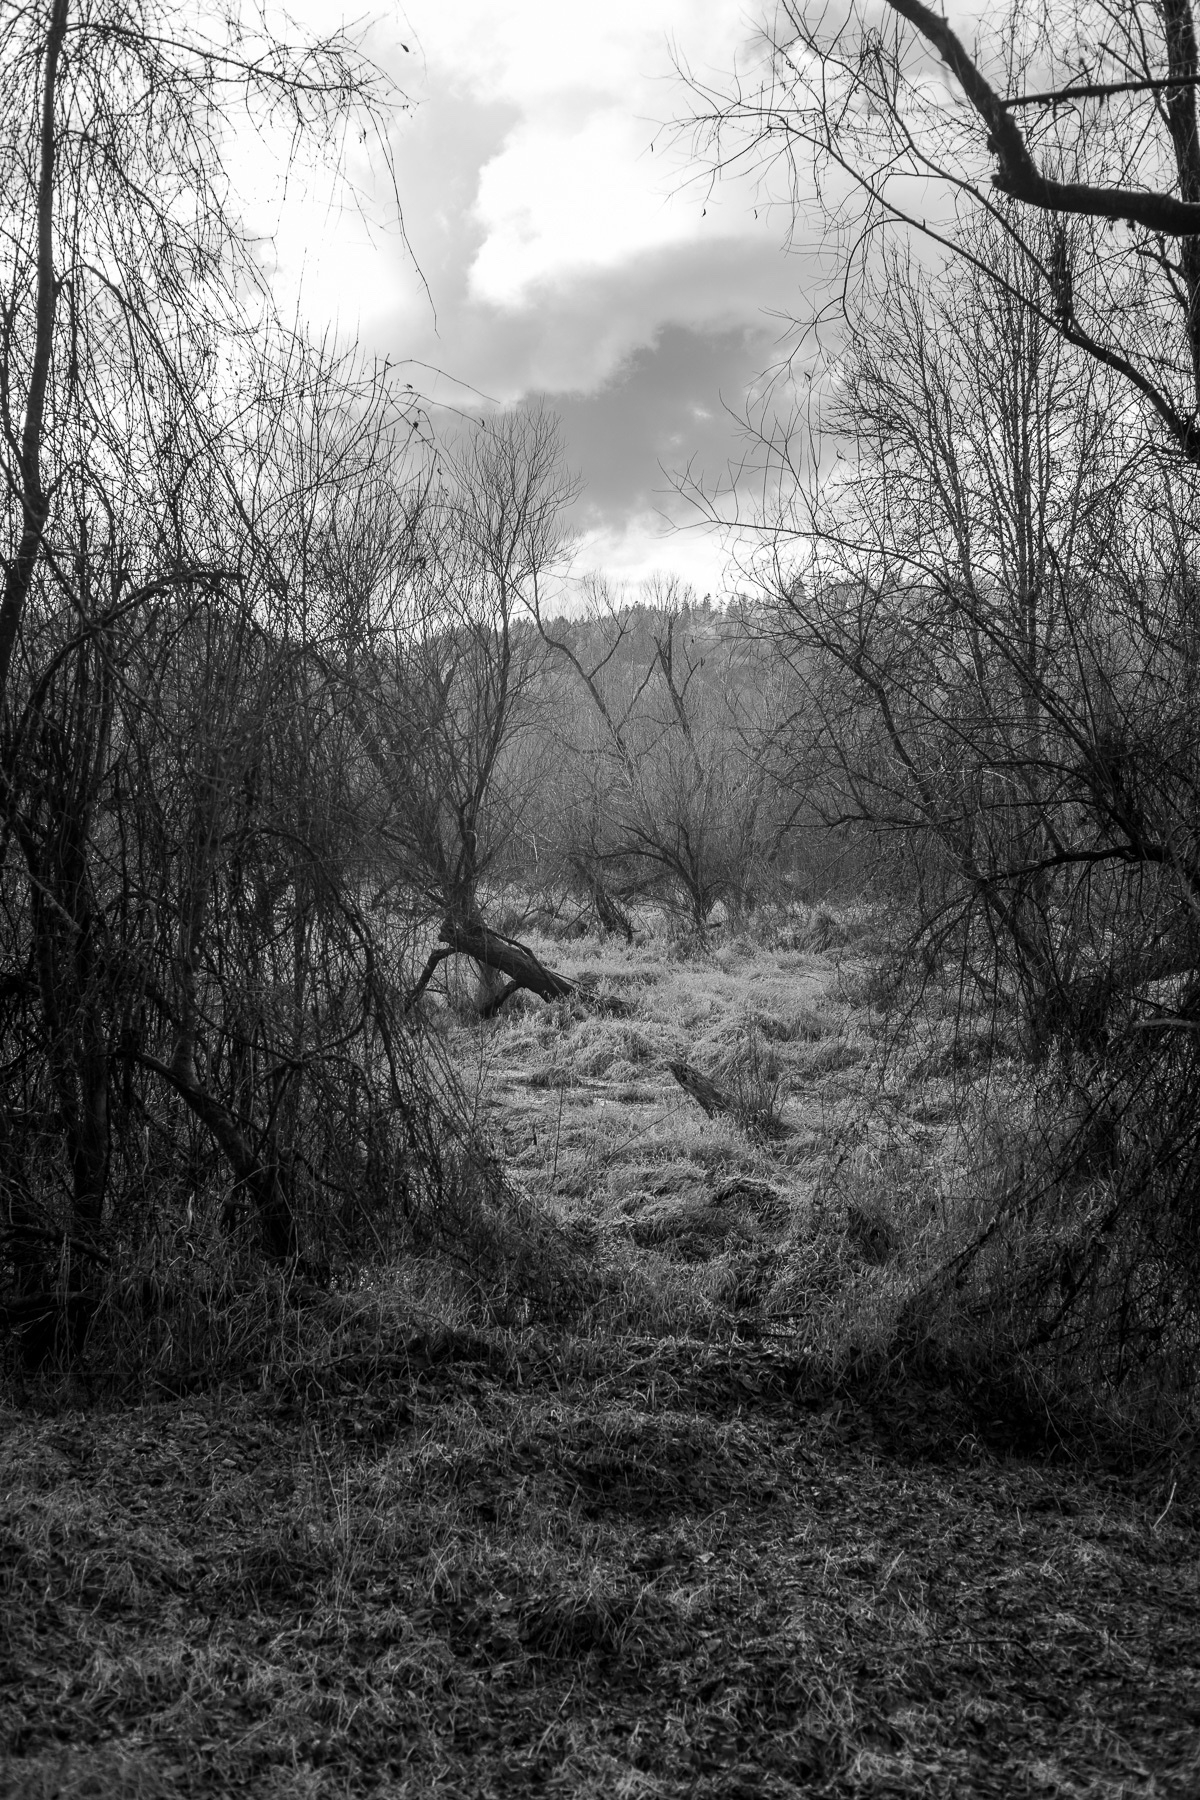 A black and white photo of wetlands with lots of ground vegetation and trees without leaves. There are hills in the distance and a dramatic cloudy sky above.